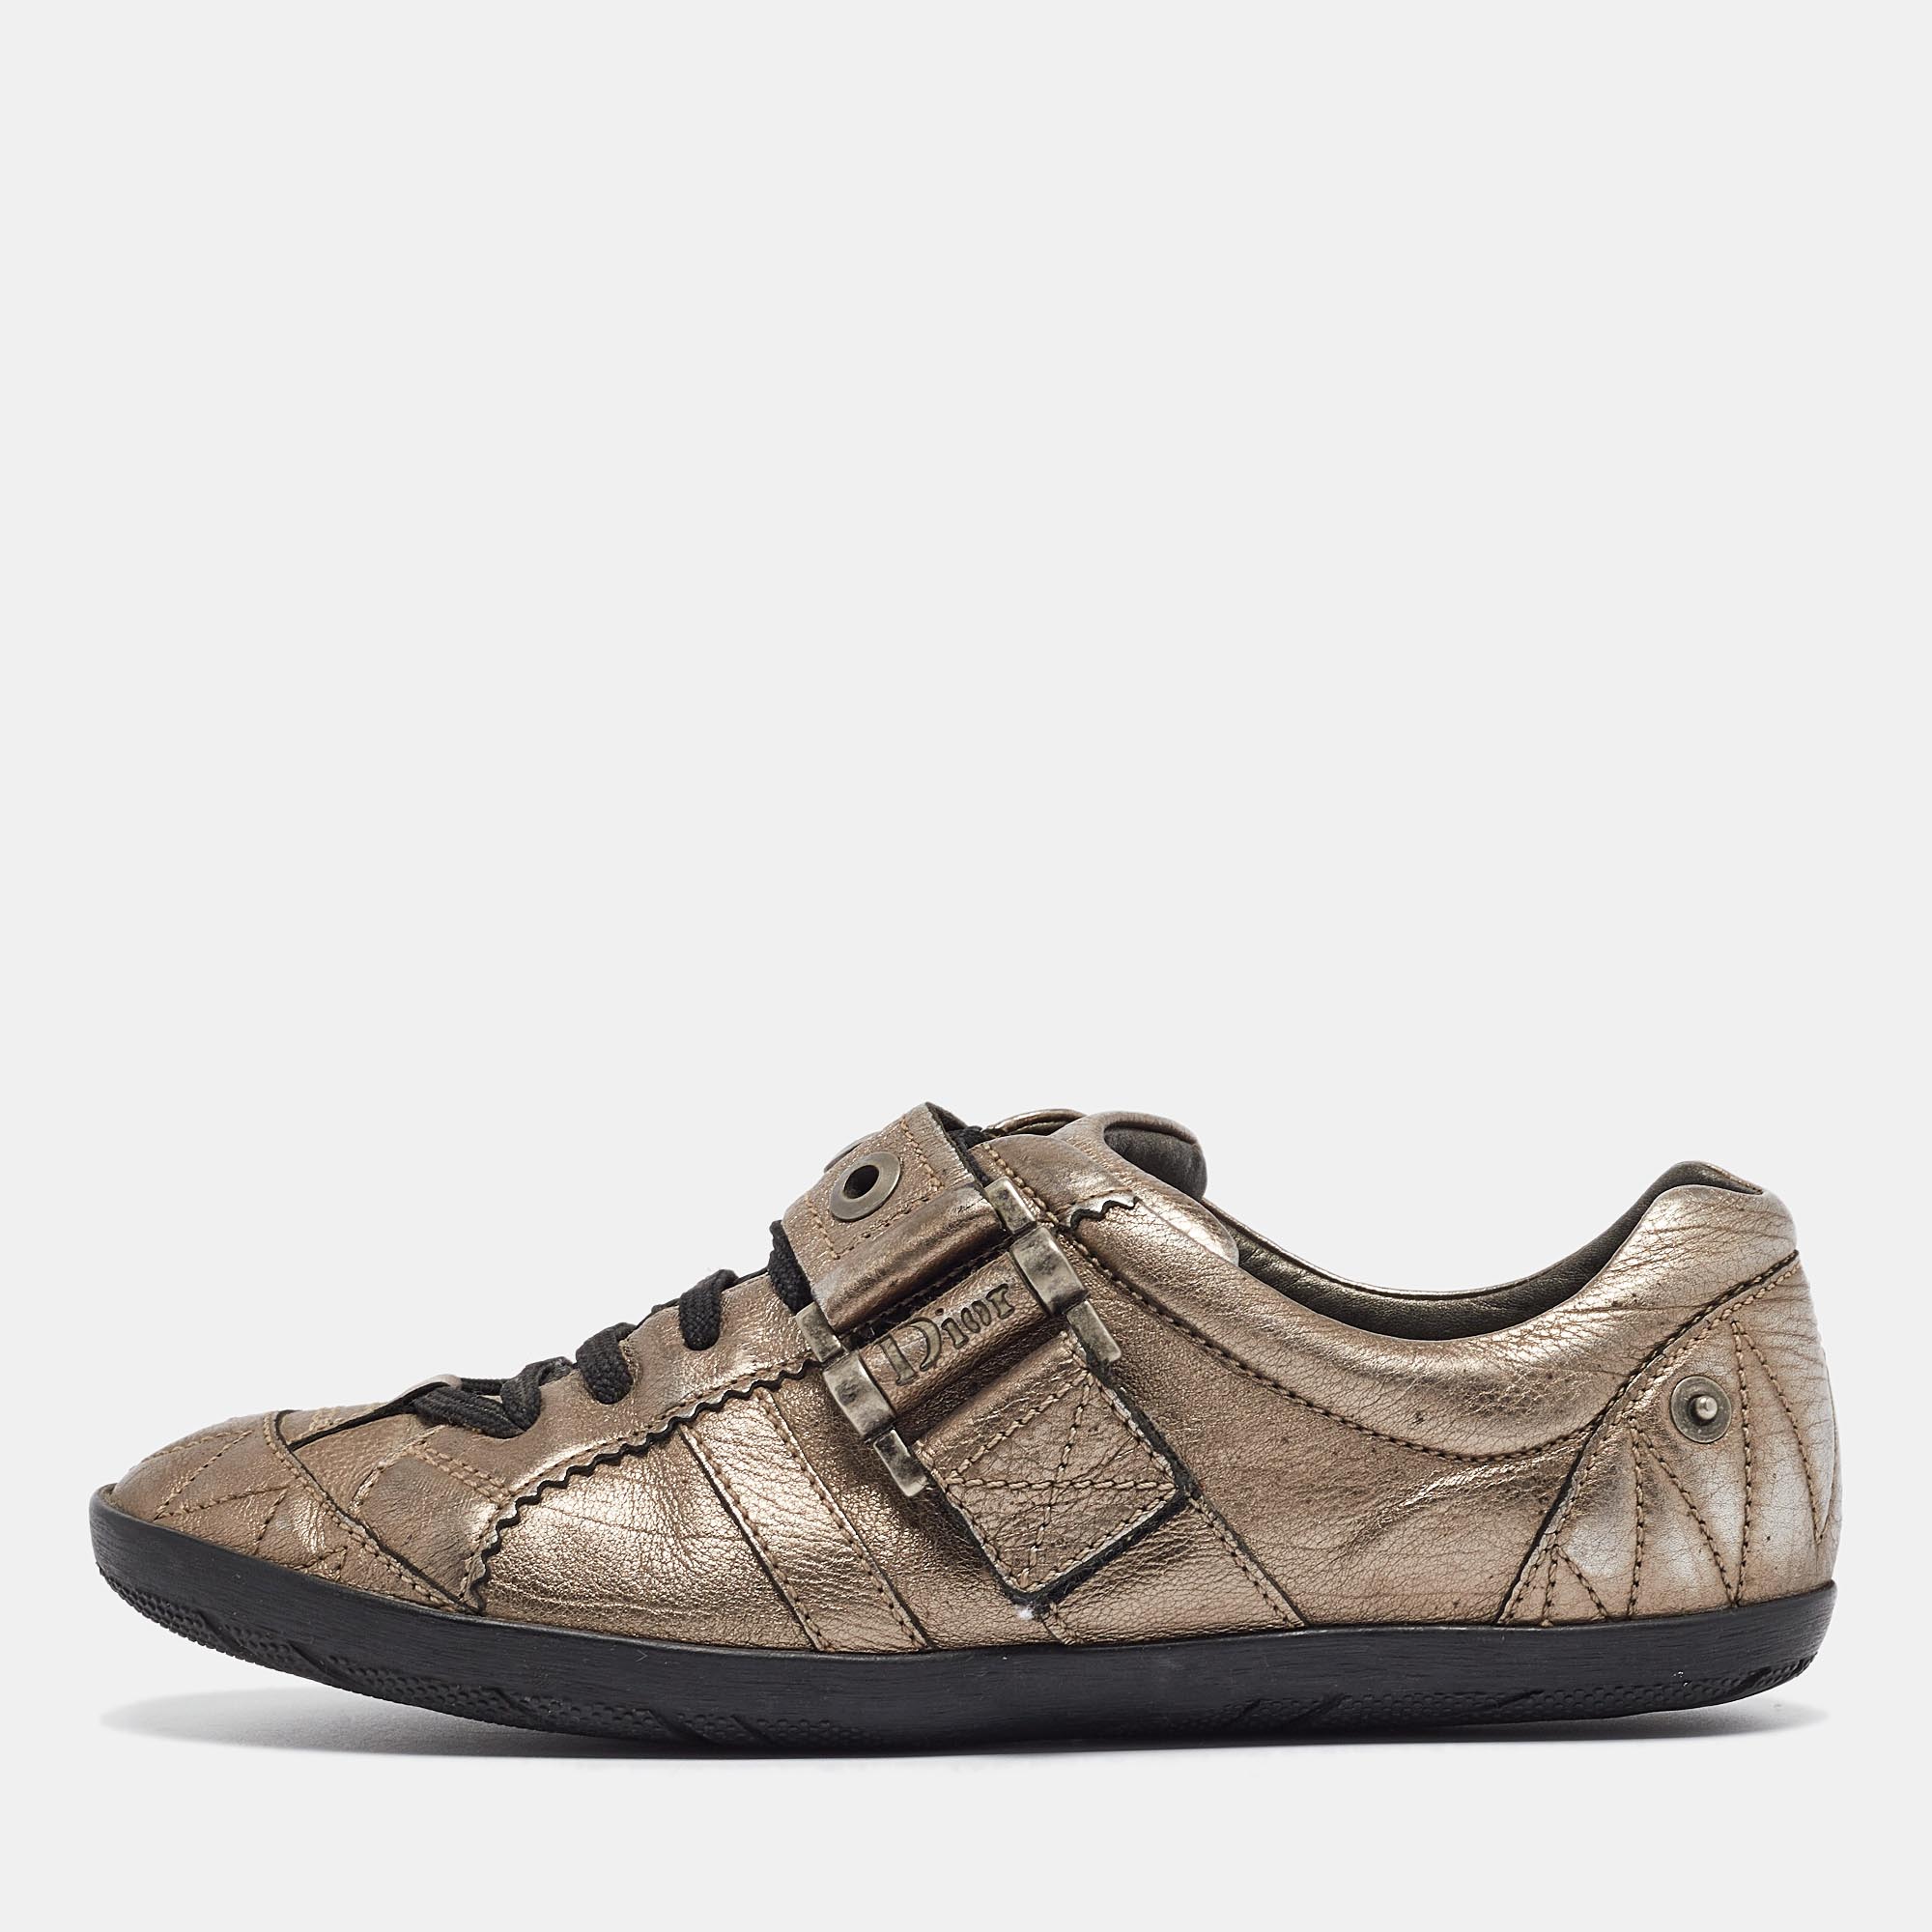 Dior metallic vintage leather low top sneakers size 36